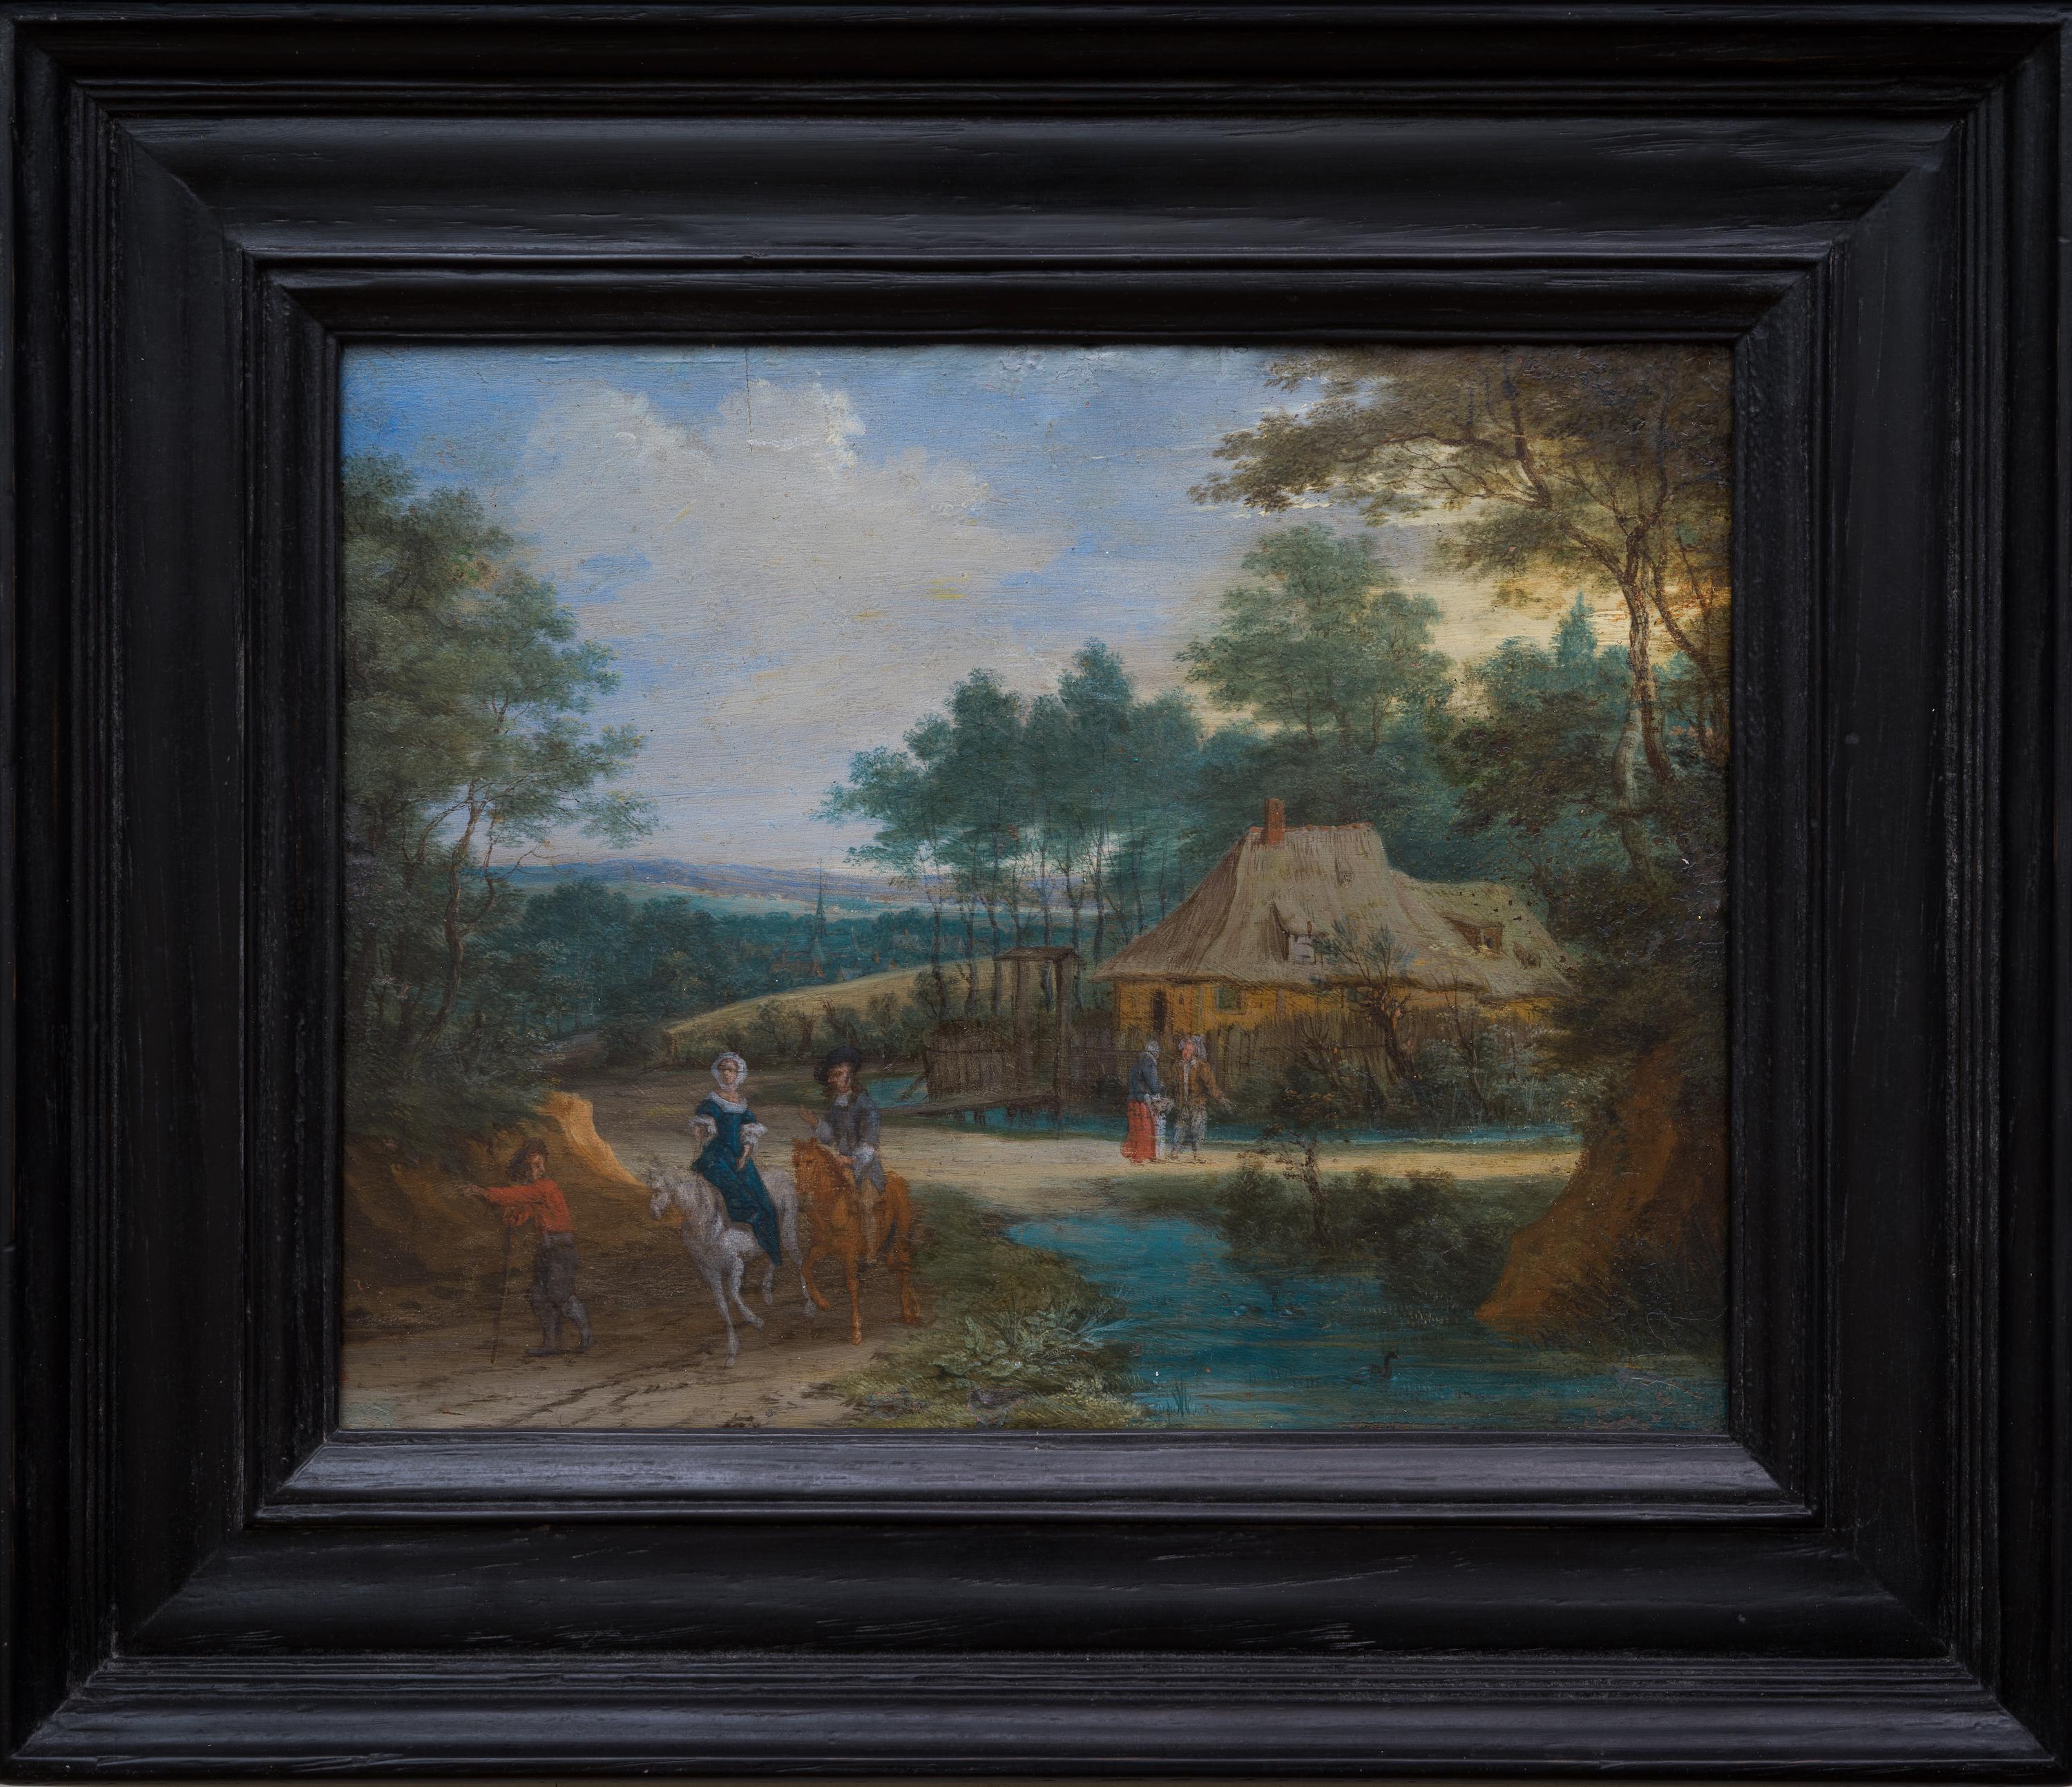 PIETER GYSELS Figurative Painting - A Wooded Landscape With Riders, Attributed to Pieter Gysels (Peeter Gijsels)